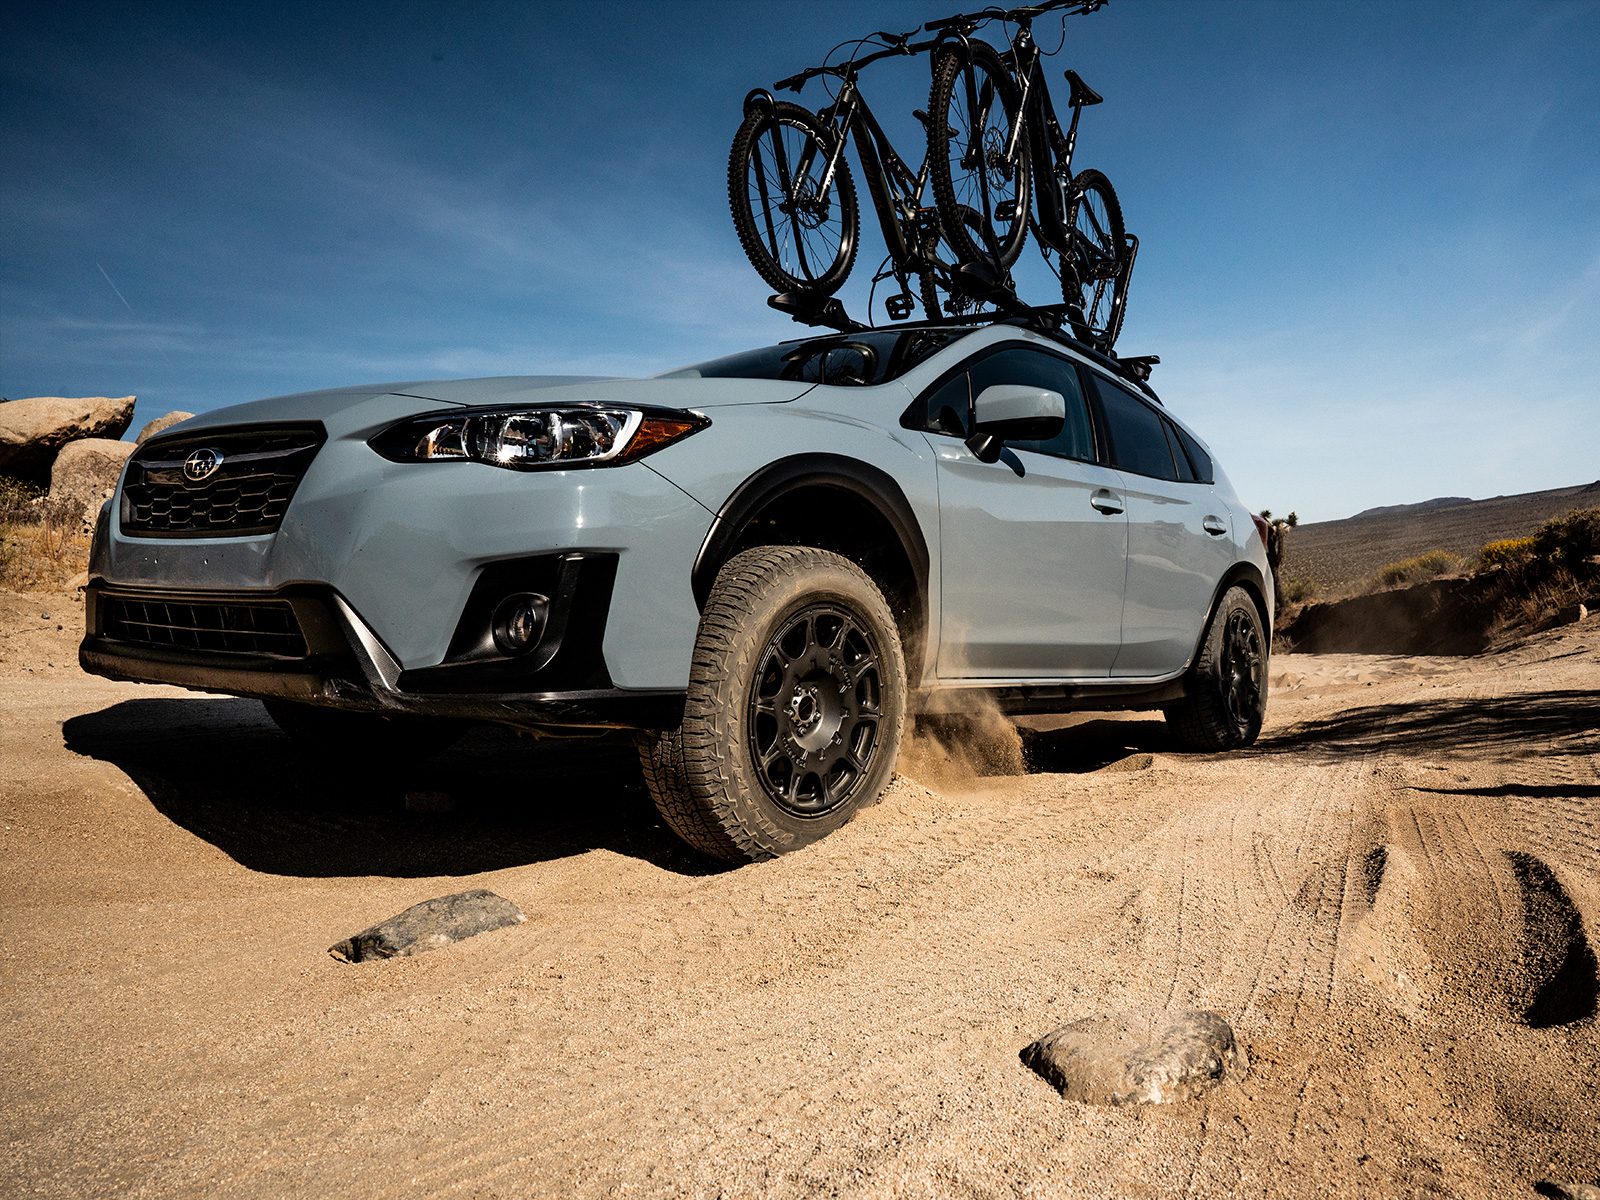 wildpeak all terrain tyres on a new Subaru outback carrying mountain bikes on a sandy mountain road